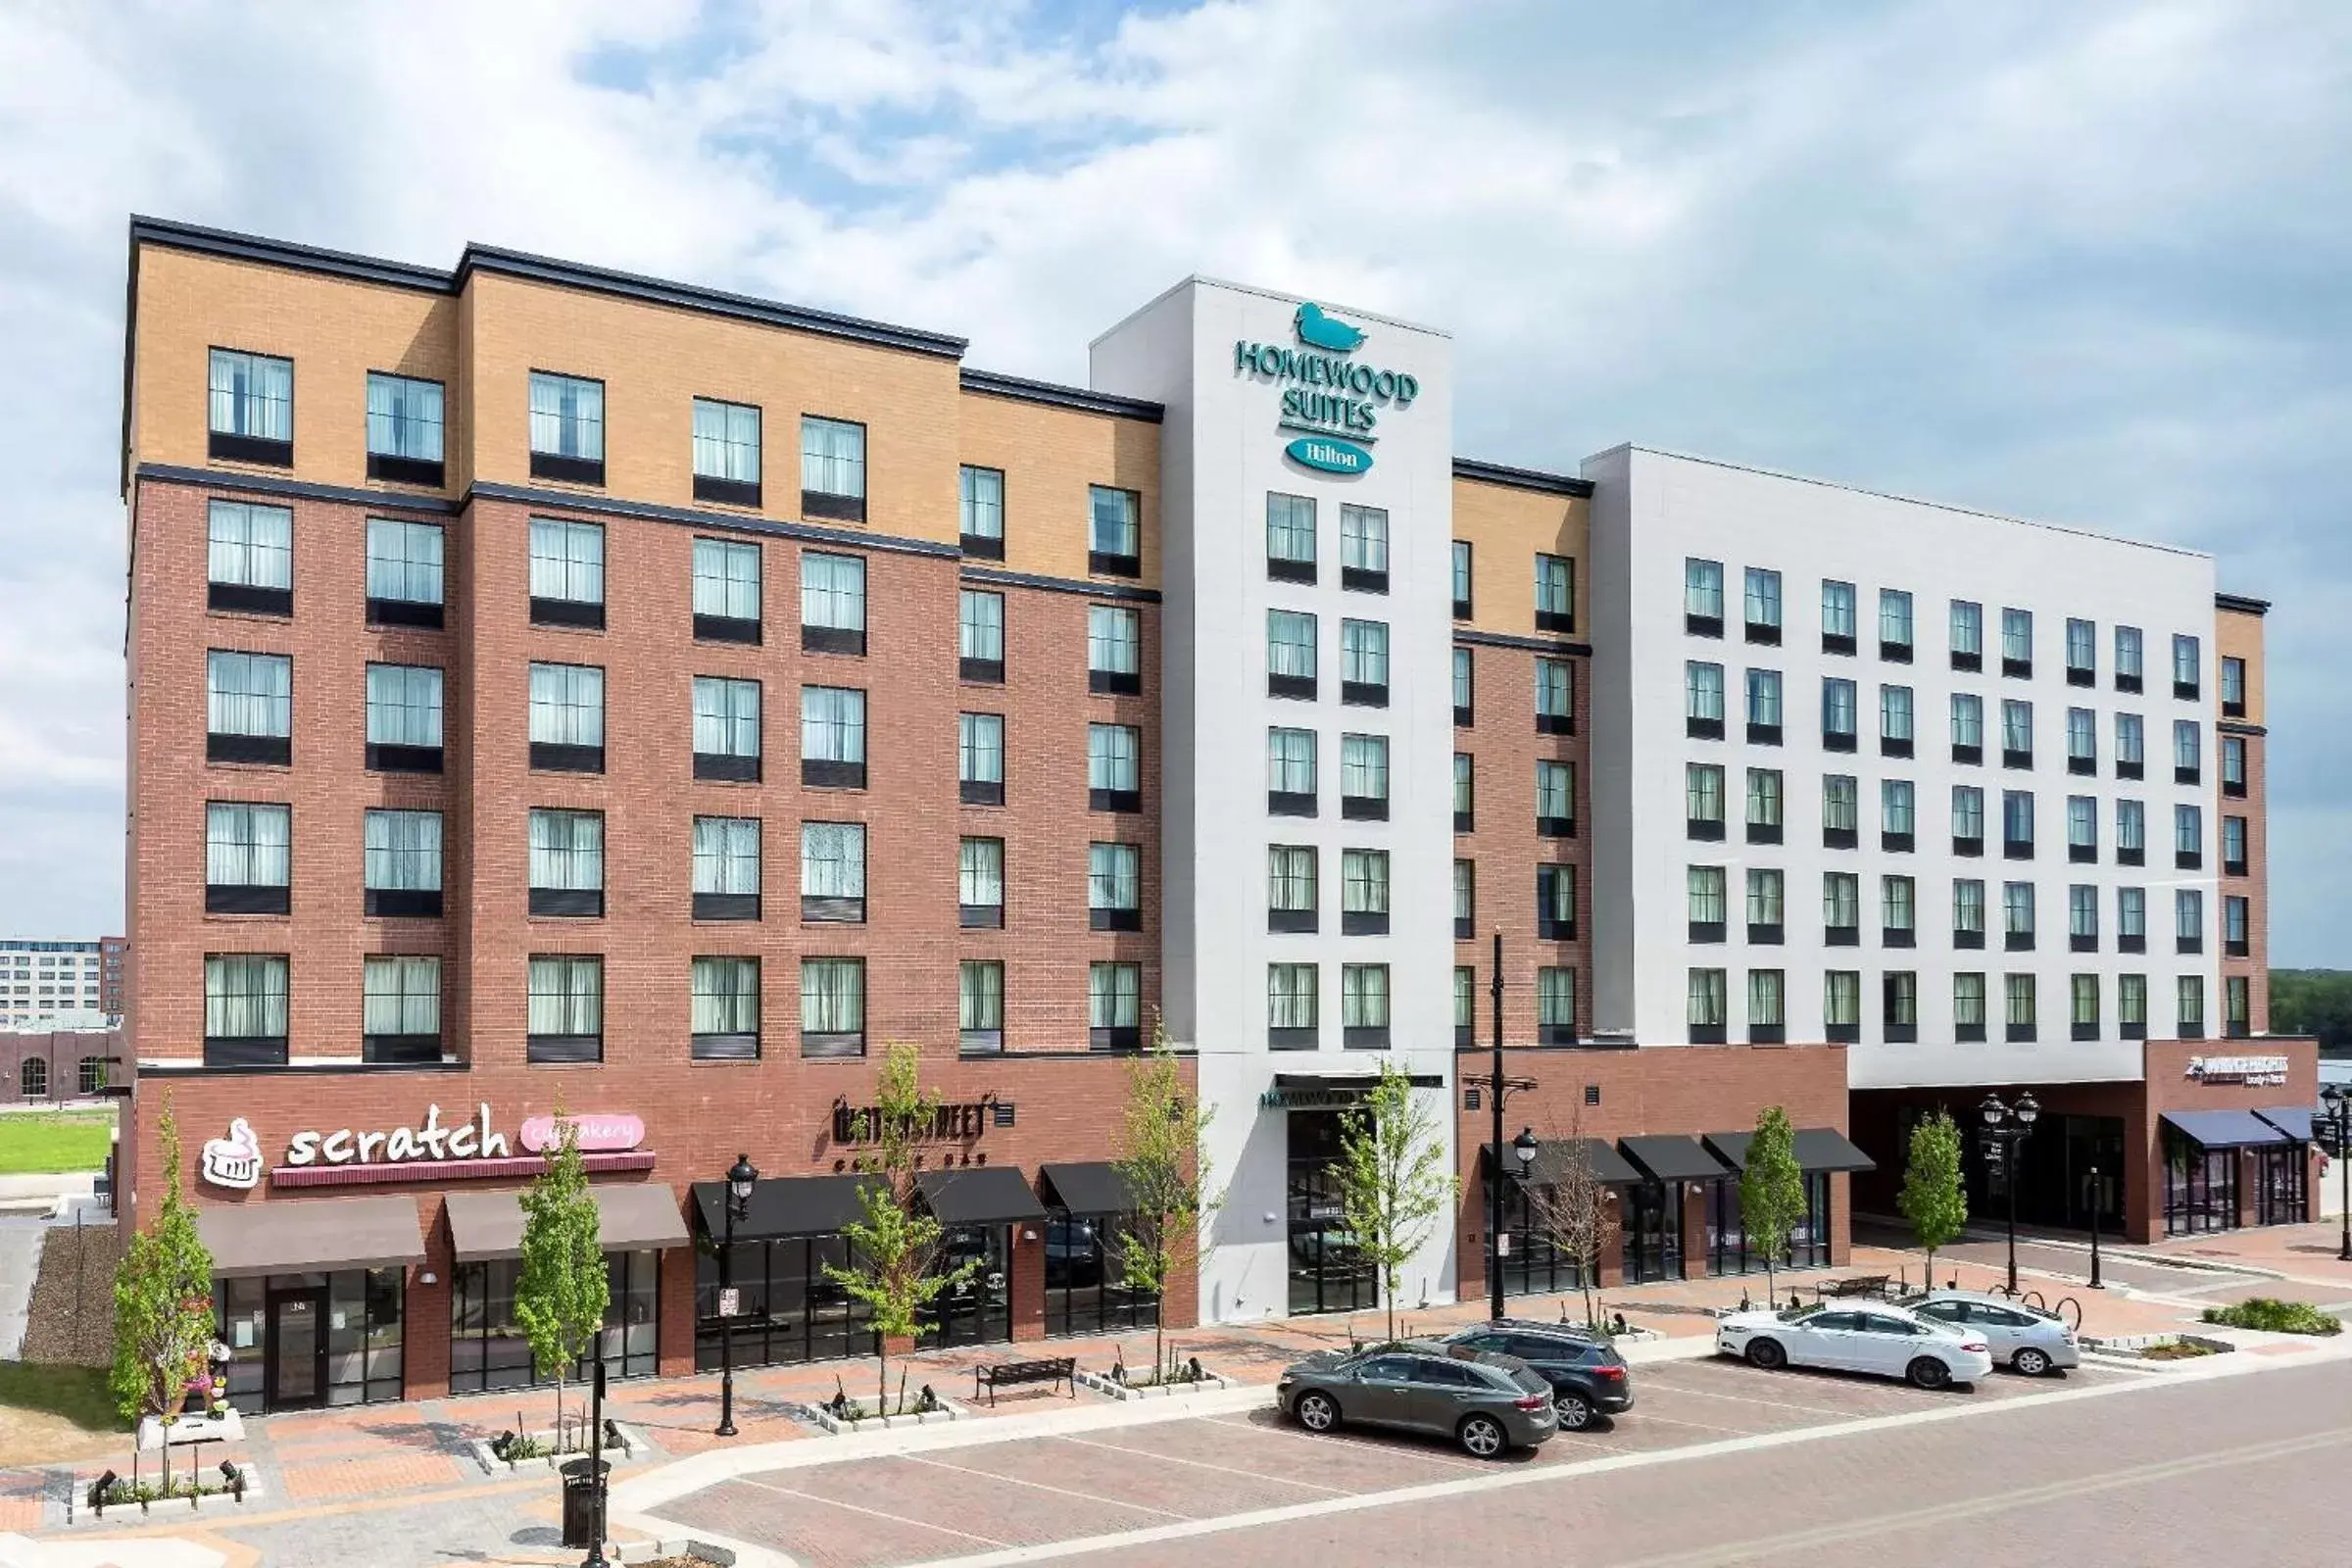 Property Building in Homewood Suites by Hilton Coralville - Iowa River Landing